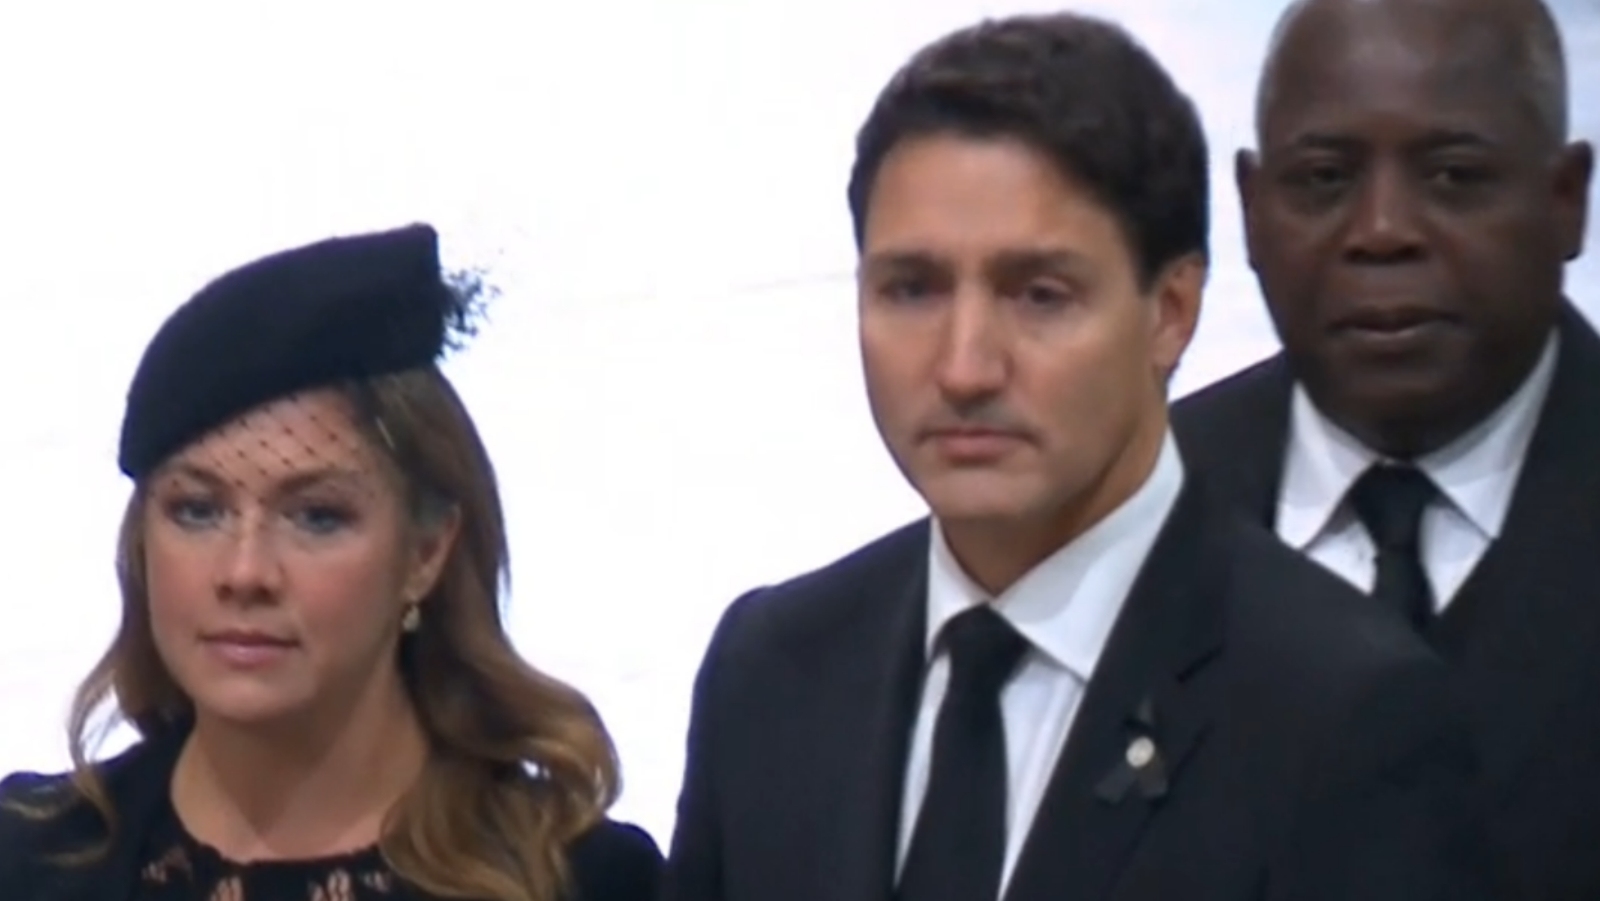 Canada prime minister Justin Trudeau at Queen's funeral - September 19, 2022